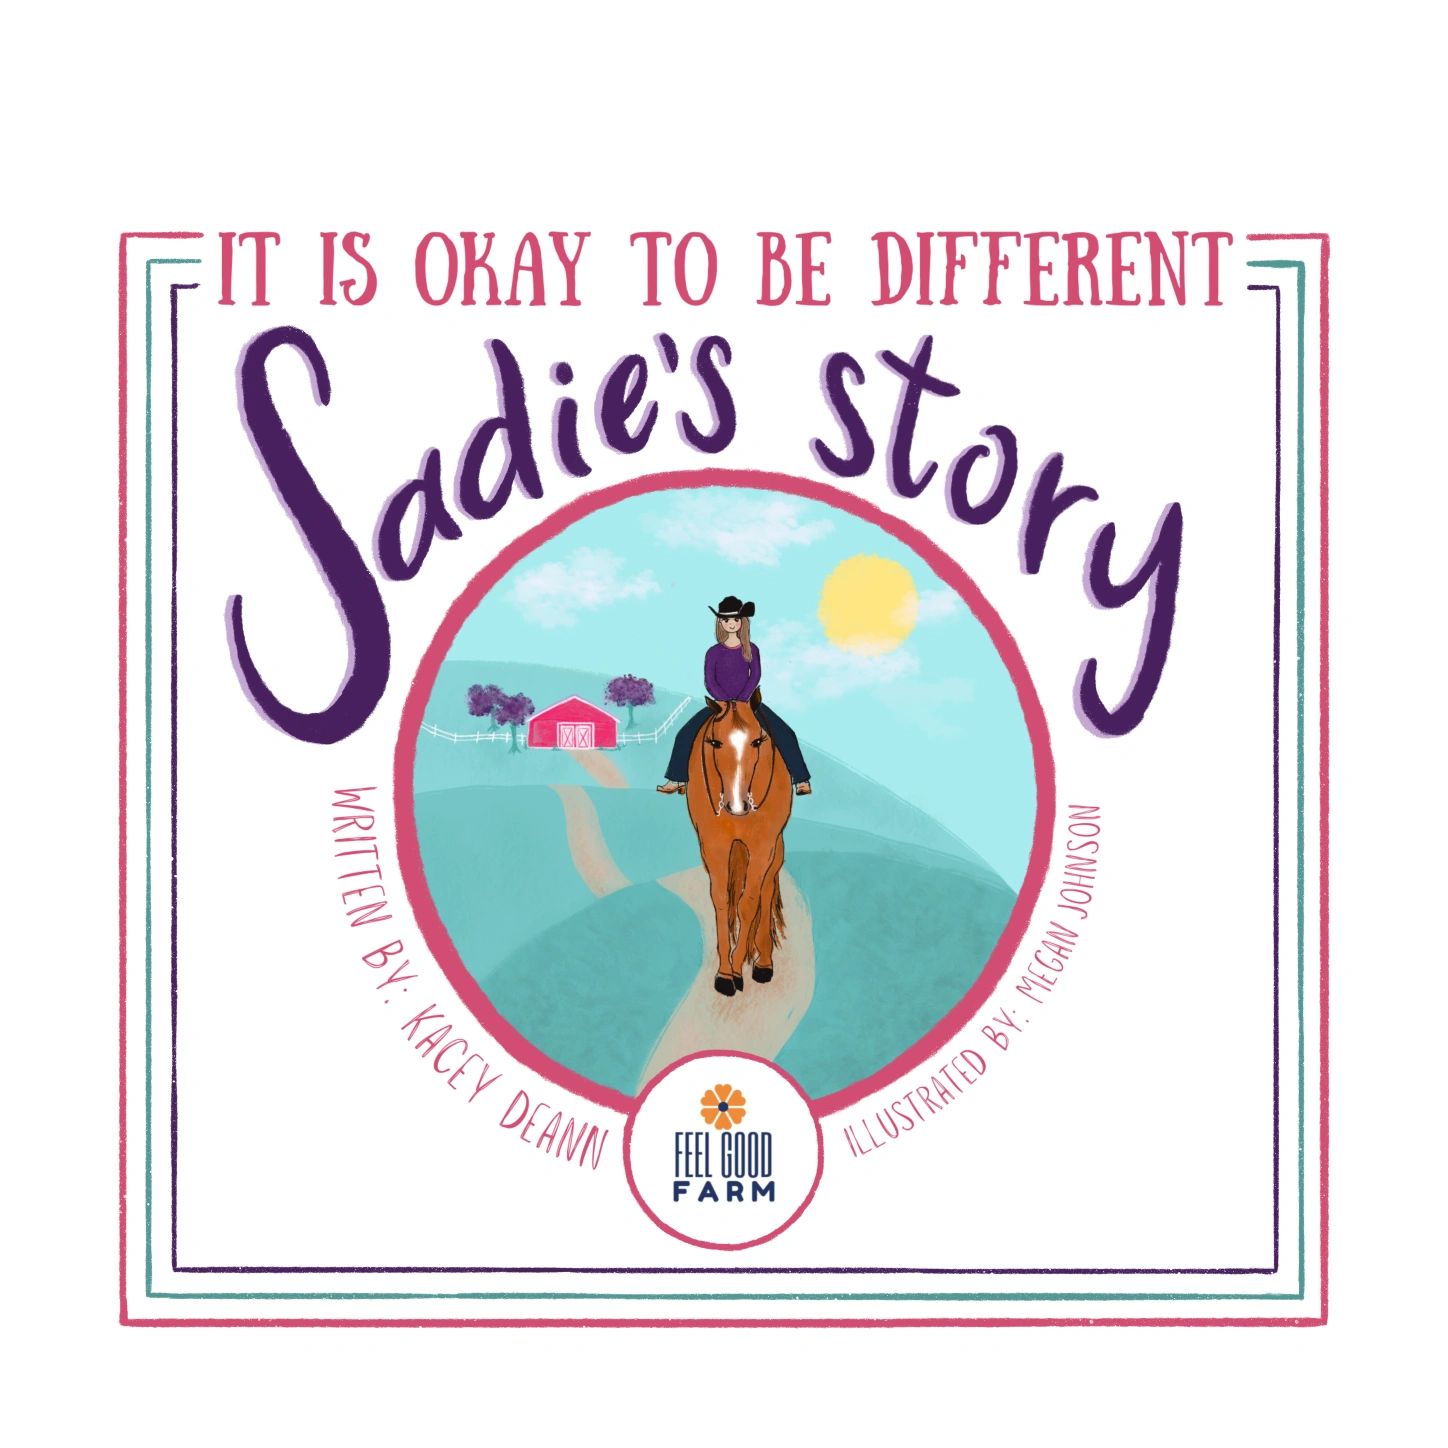 Sadie's Story by Kacey Deann.  A children's book about how it is okay to be different.  